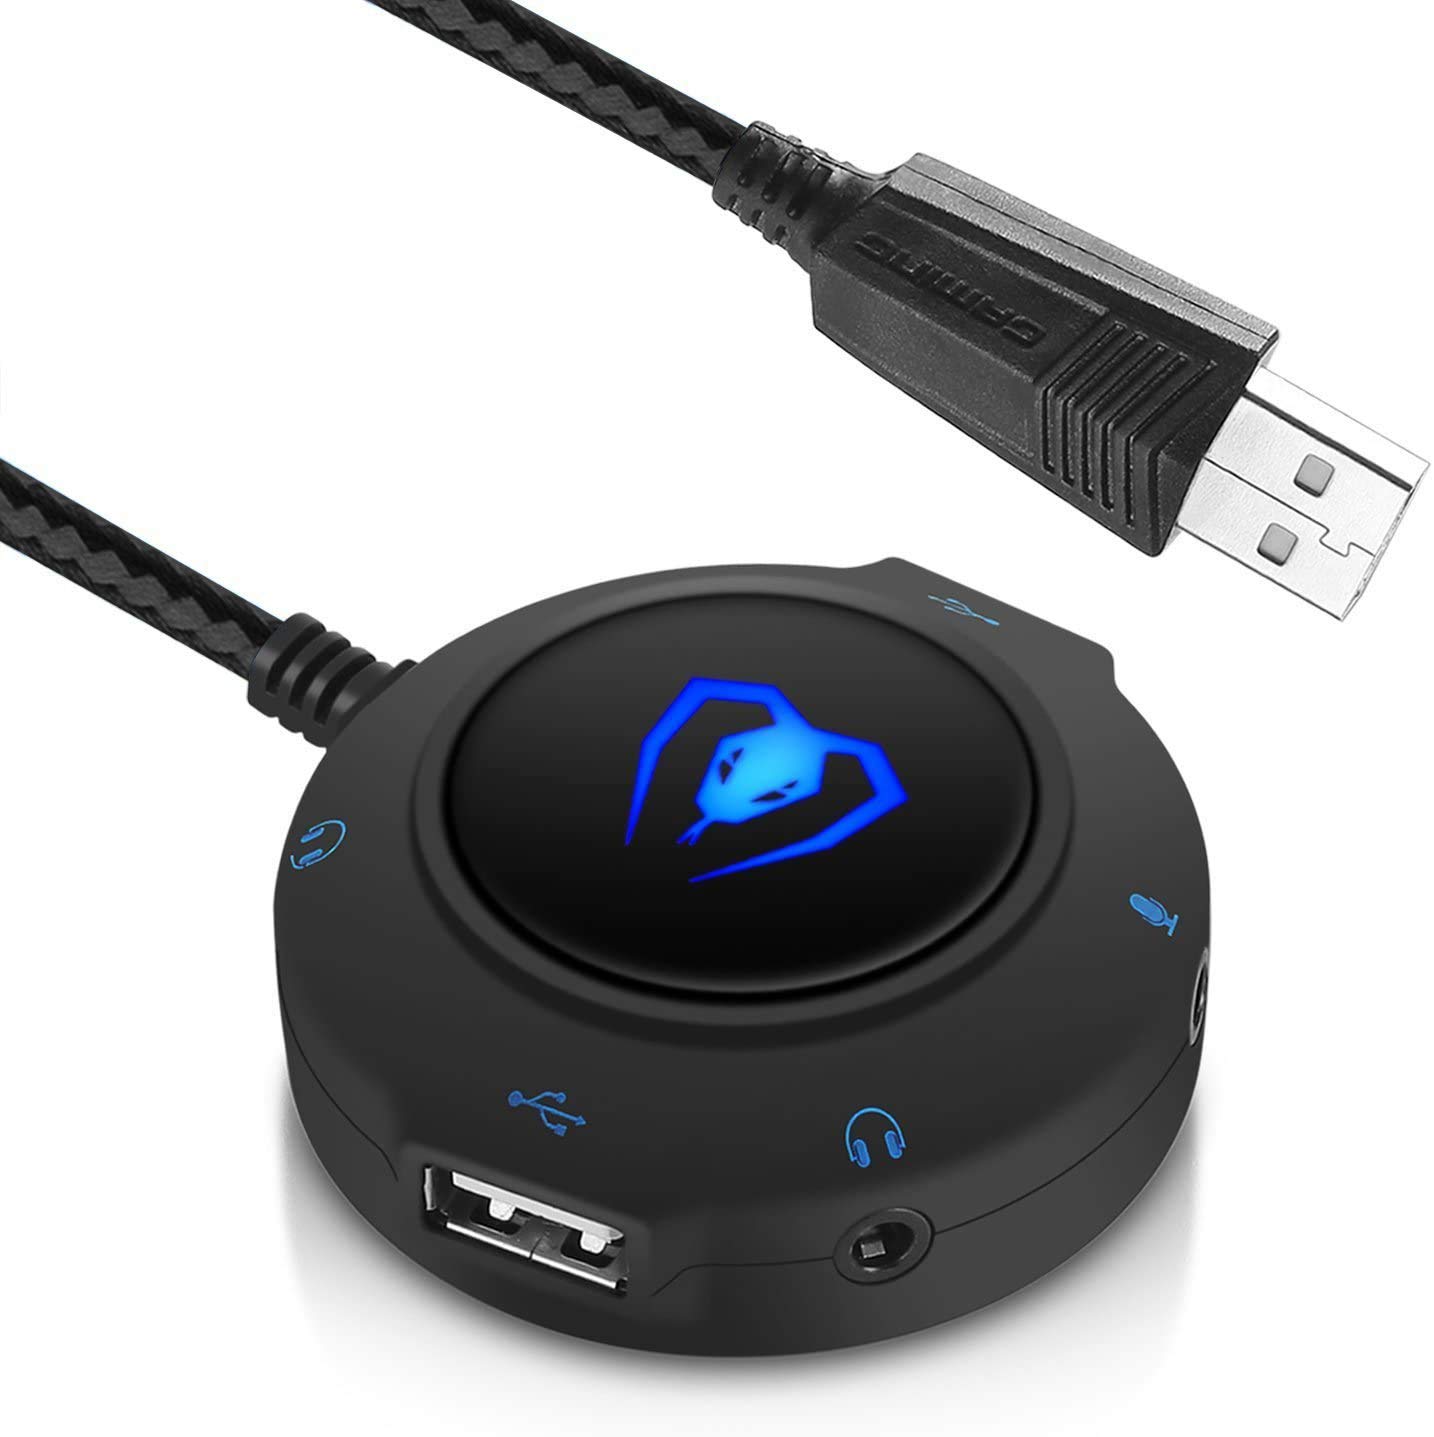 Micolindun External Sound Card USB Hubs Audio Adapter to USB Port & 3.5mm Audio & Micro Jack for PC Laptop. Plug and Play (Blue)